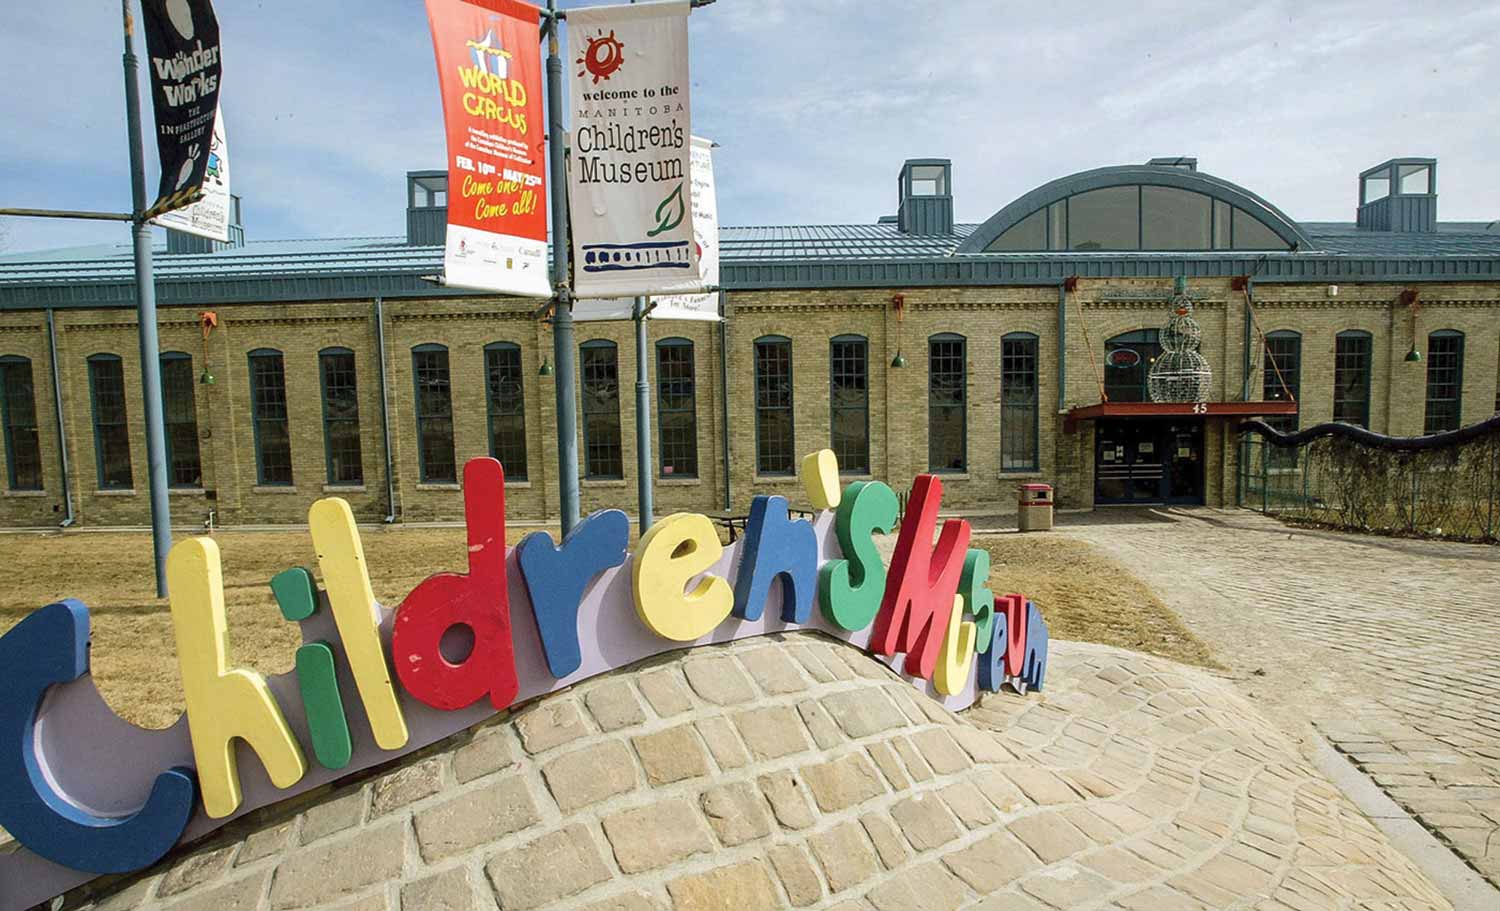 The Manitoba Children's museum in 1994, showing the original brick engine house with a blue metal roof. There is a wavy path out front with a colourful lettered sign reading "Children's Museum"